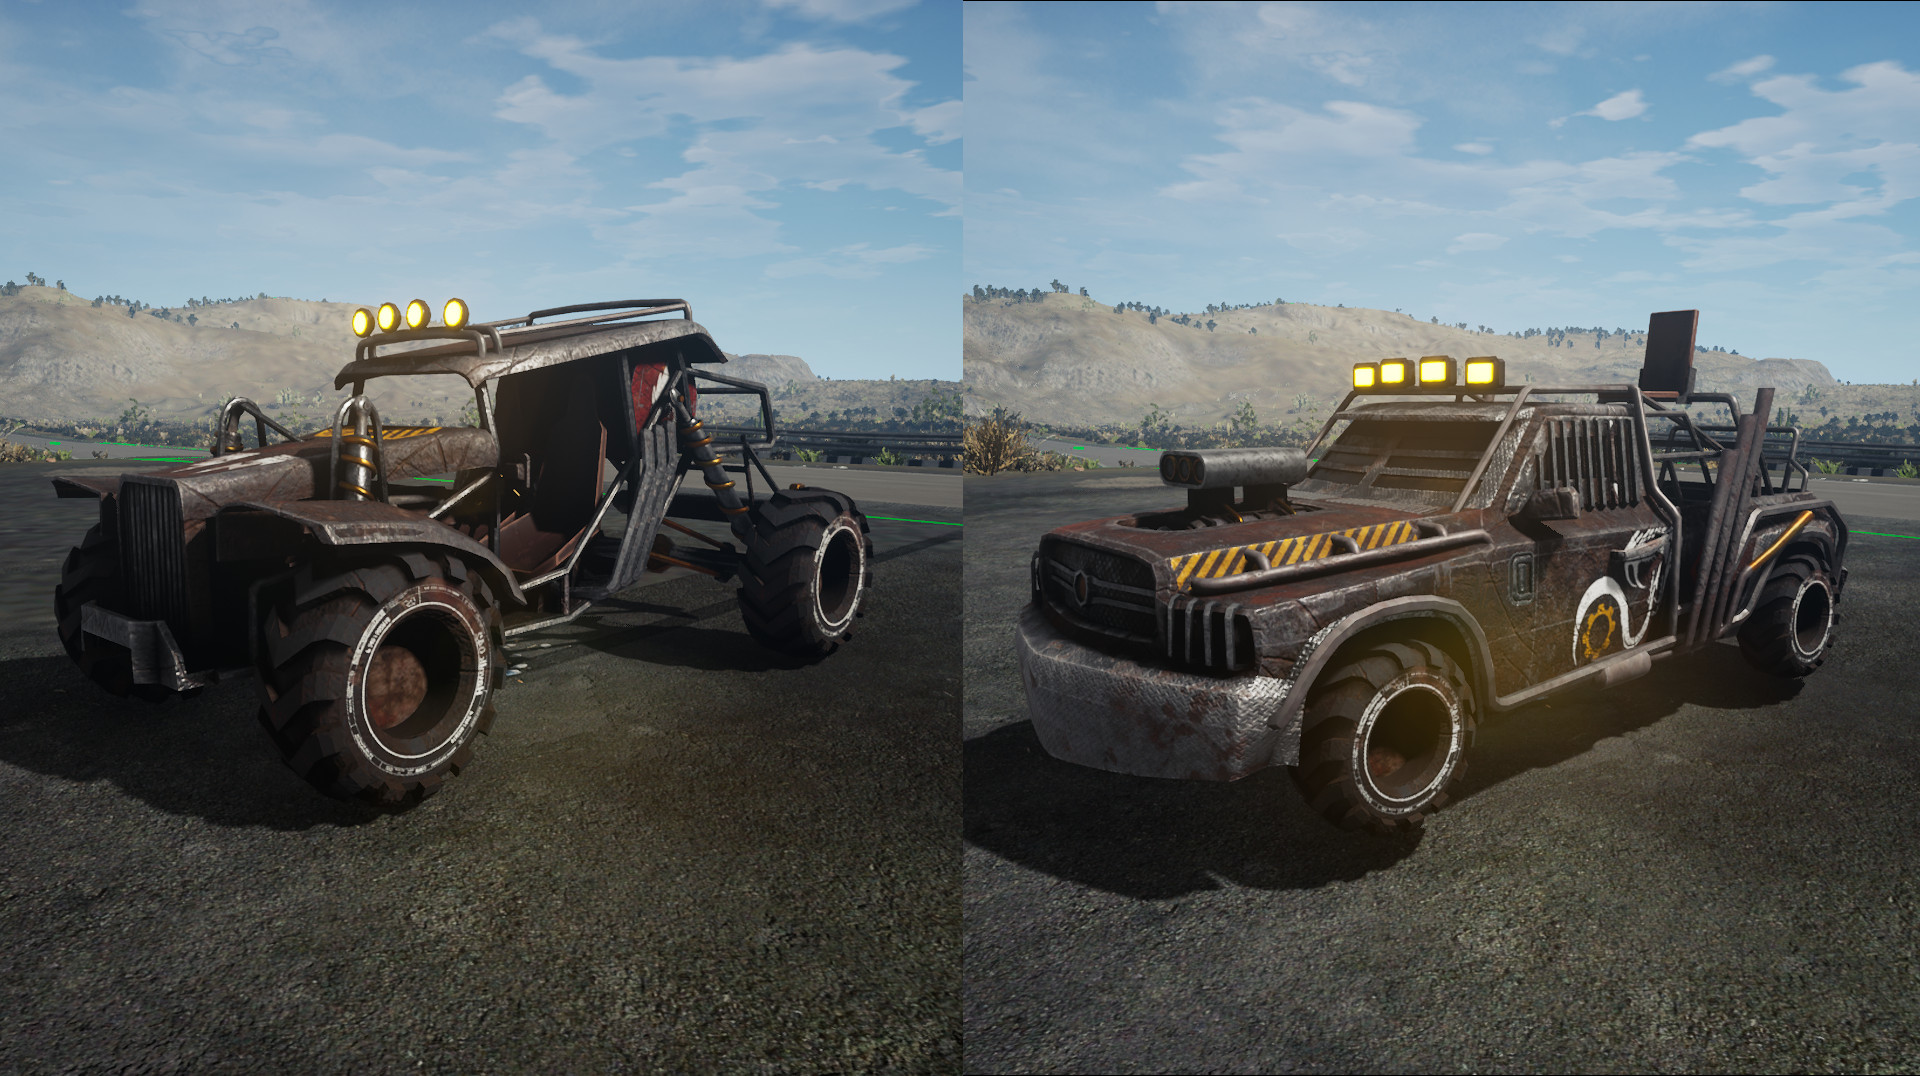 ArtStation - Multiplayer Local Server Toy Racing Game